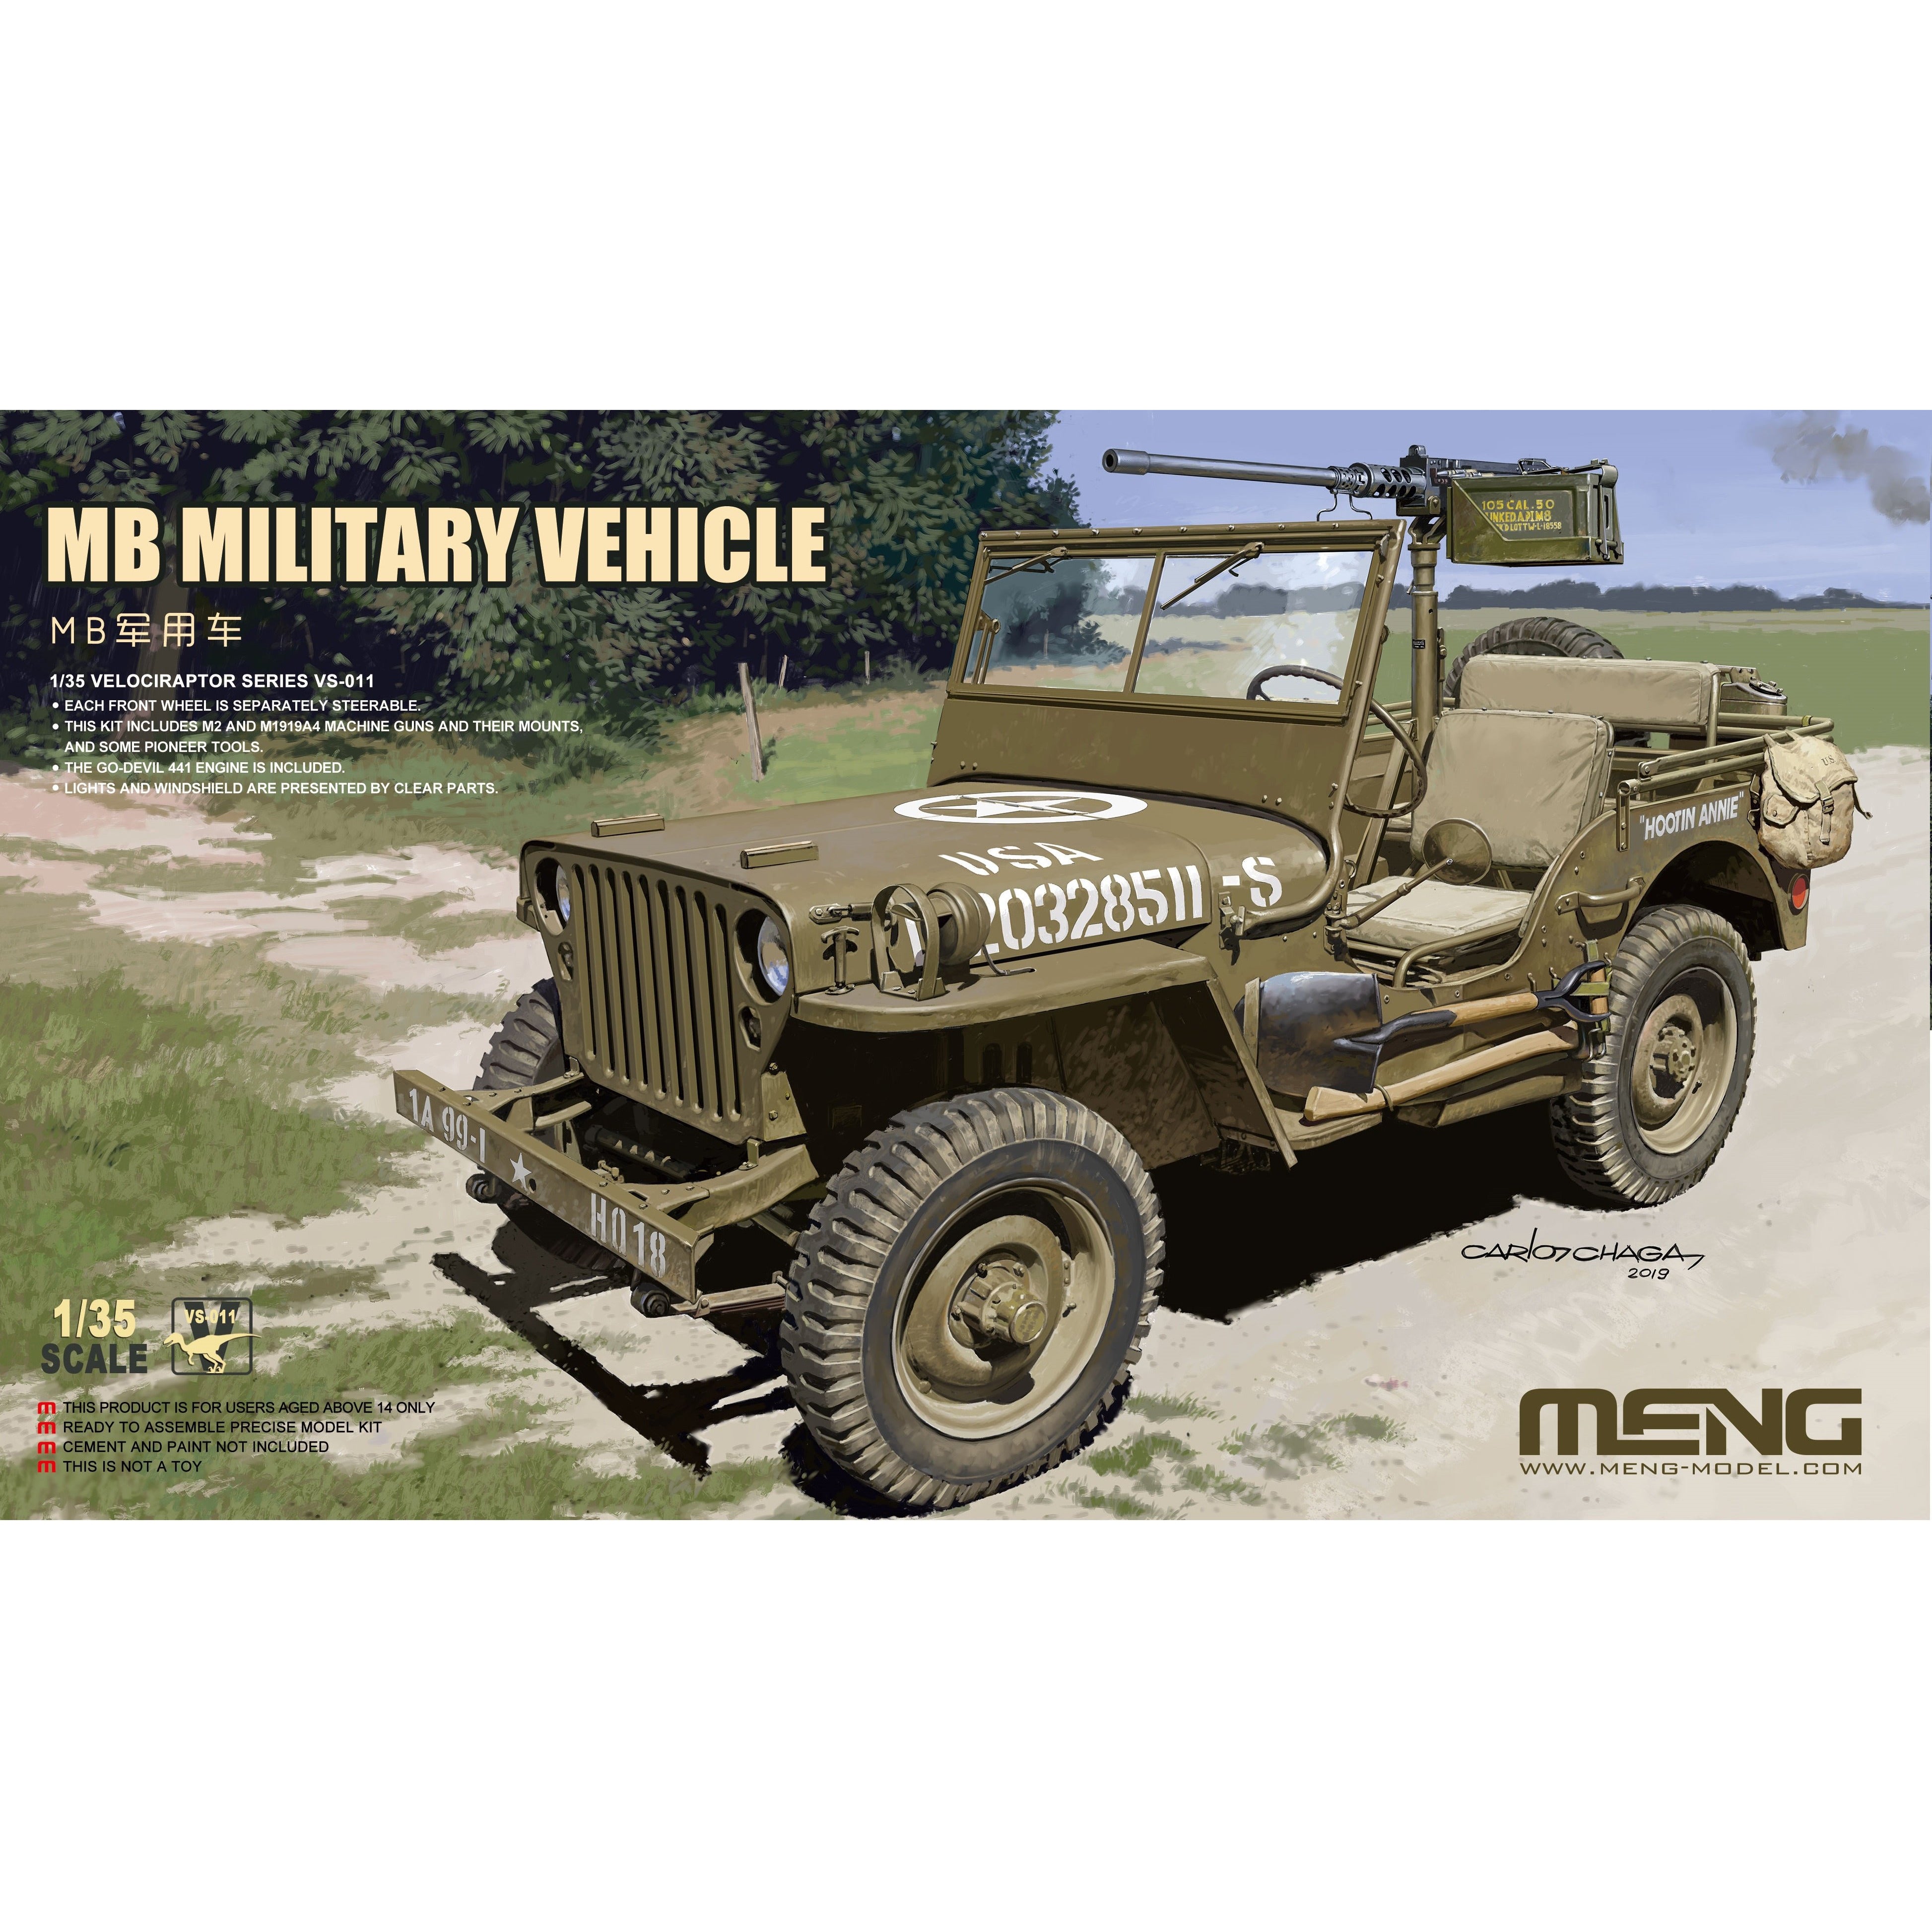 MB Military Vehicle 1/35 by Meng